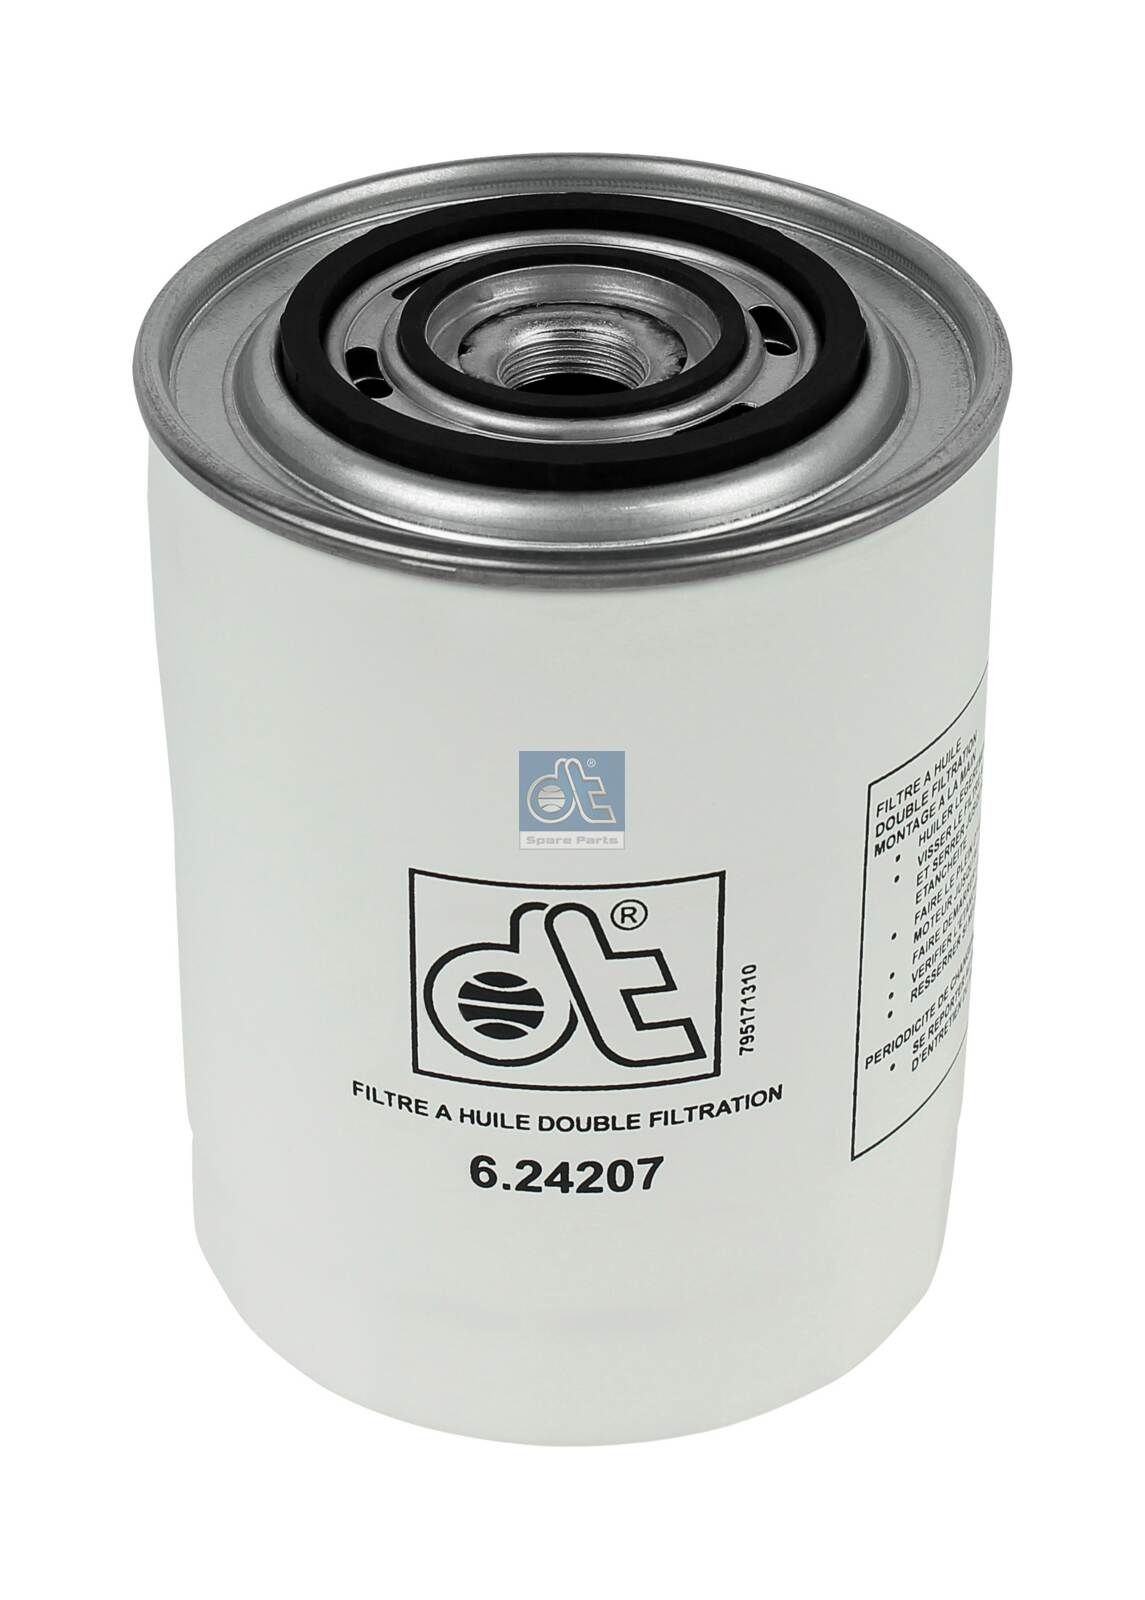 WP 1144 DT Spare Parts 6.24207 Oil filter 0190 2047